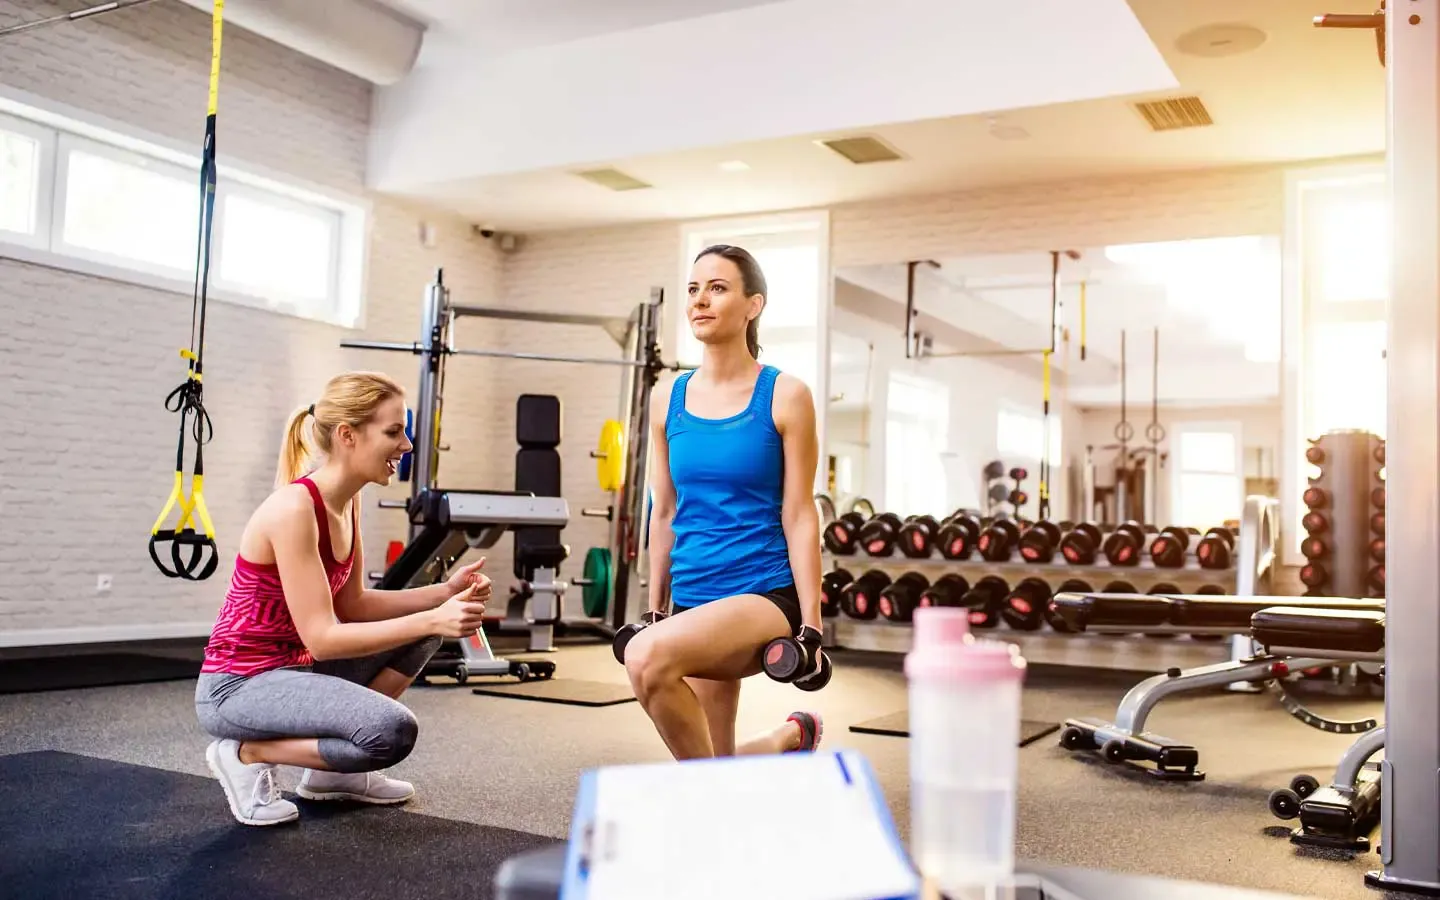 What Are the Qualities of a Successful Fitness Instructor